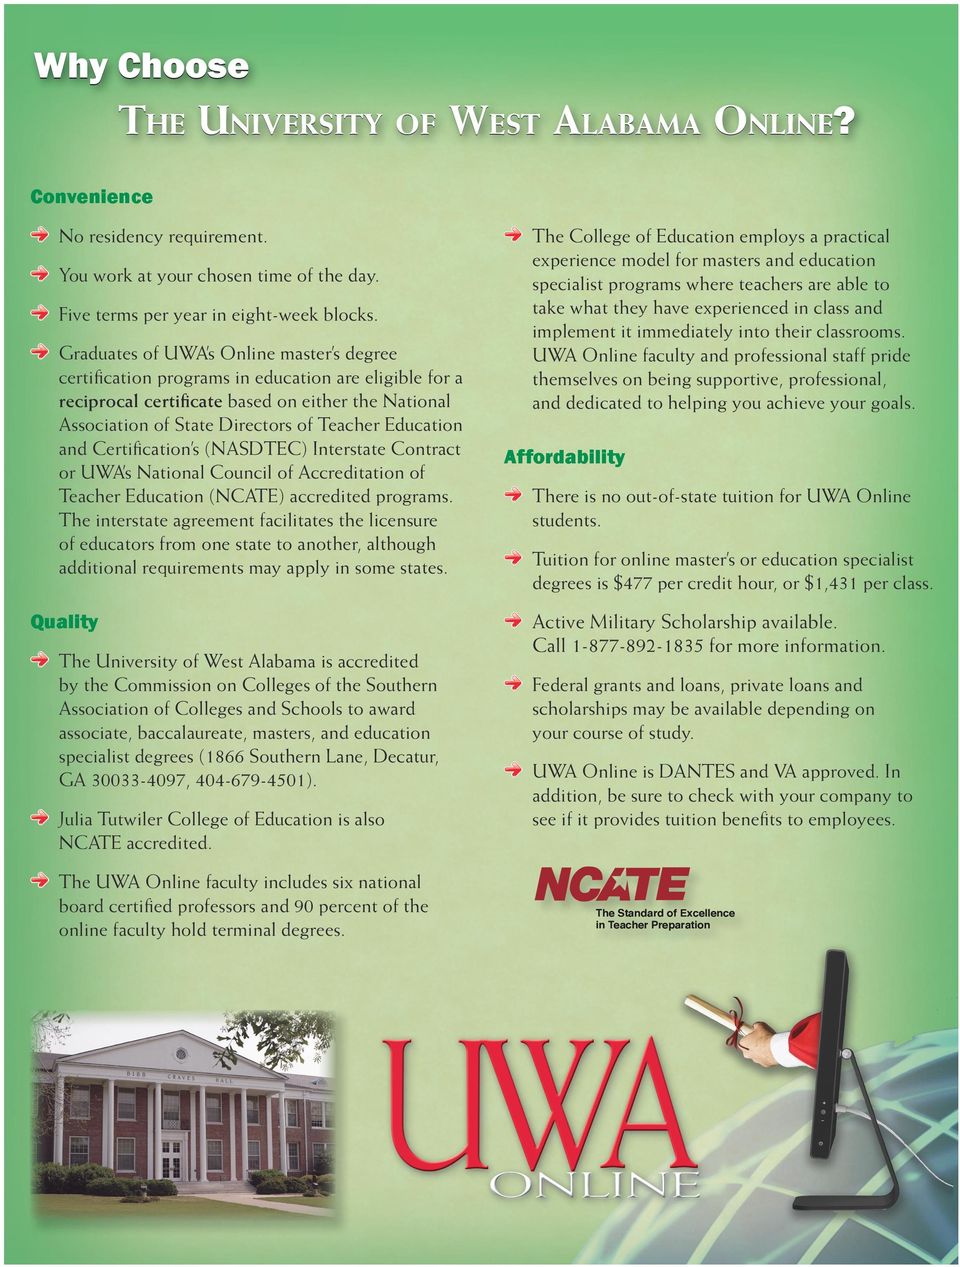 Education and Certification s (NASDTEC) Interstate Contract or UWA s National Council of Accreditation of Teacher Education (NCATE) accredited programs.